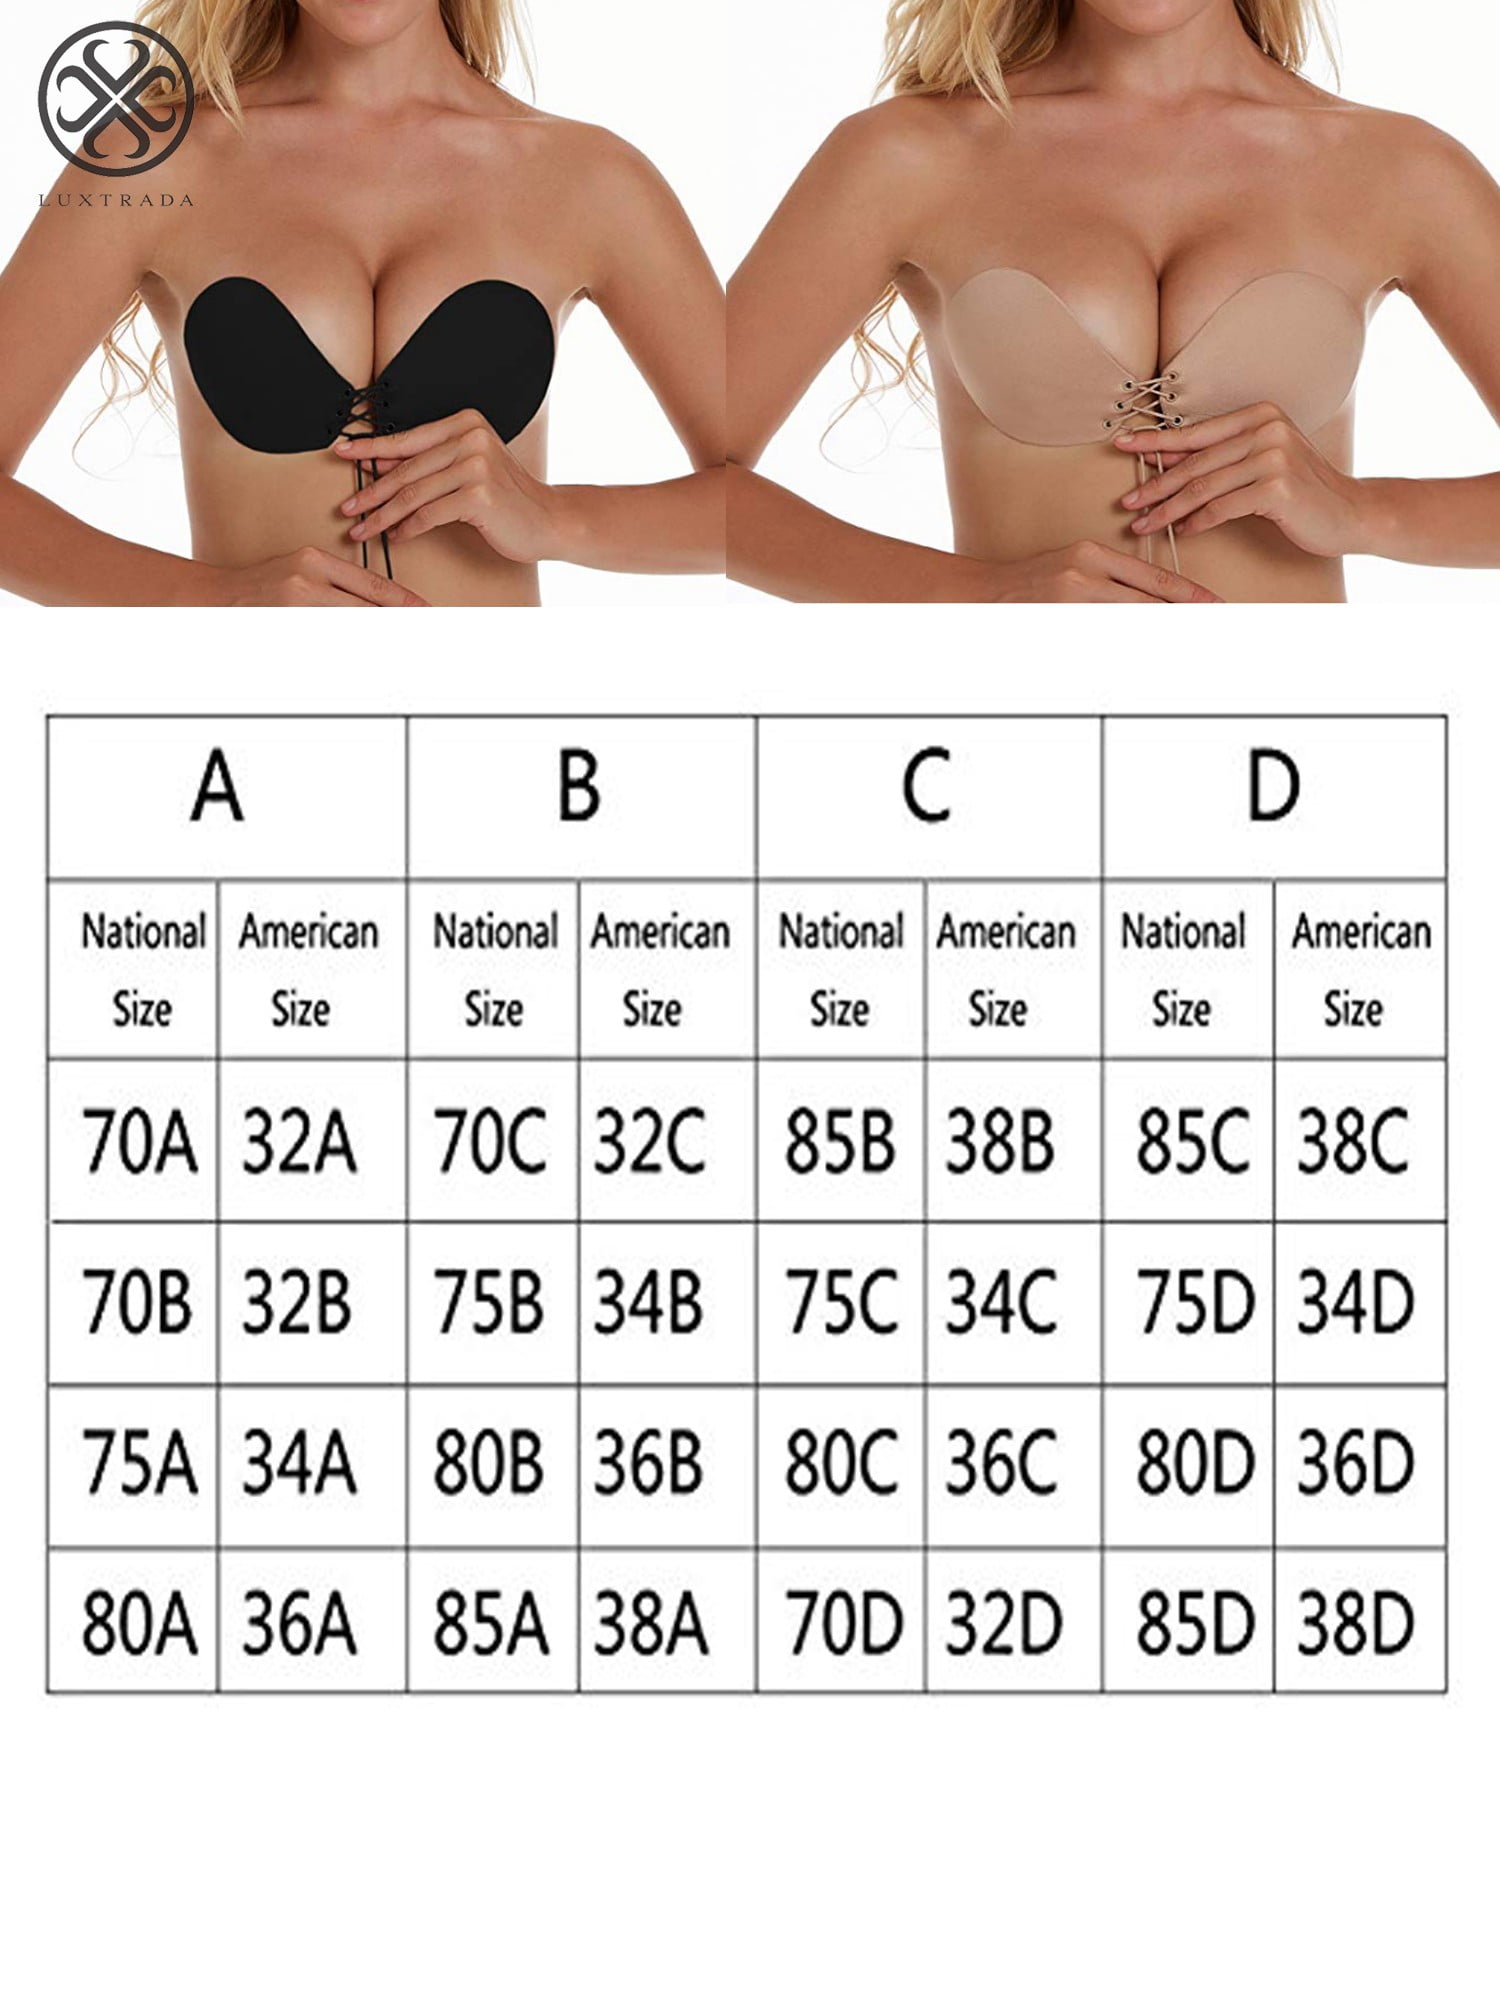 Luxtrada Strapless Self Adhesive Bra, Push Up Invisible Silicone Bras for  Women with Drawstring Suit For Dress Wedding PartySkin,Cup D 